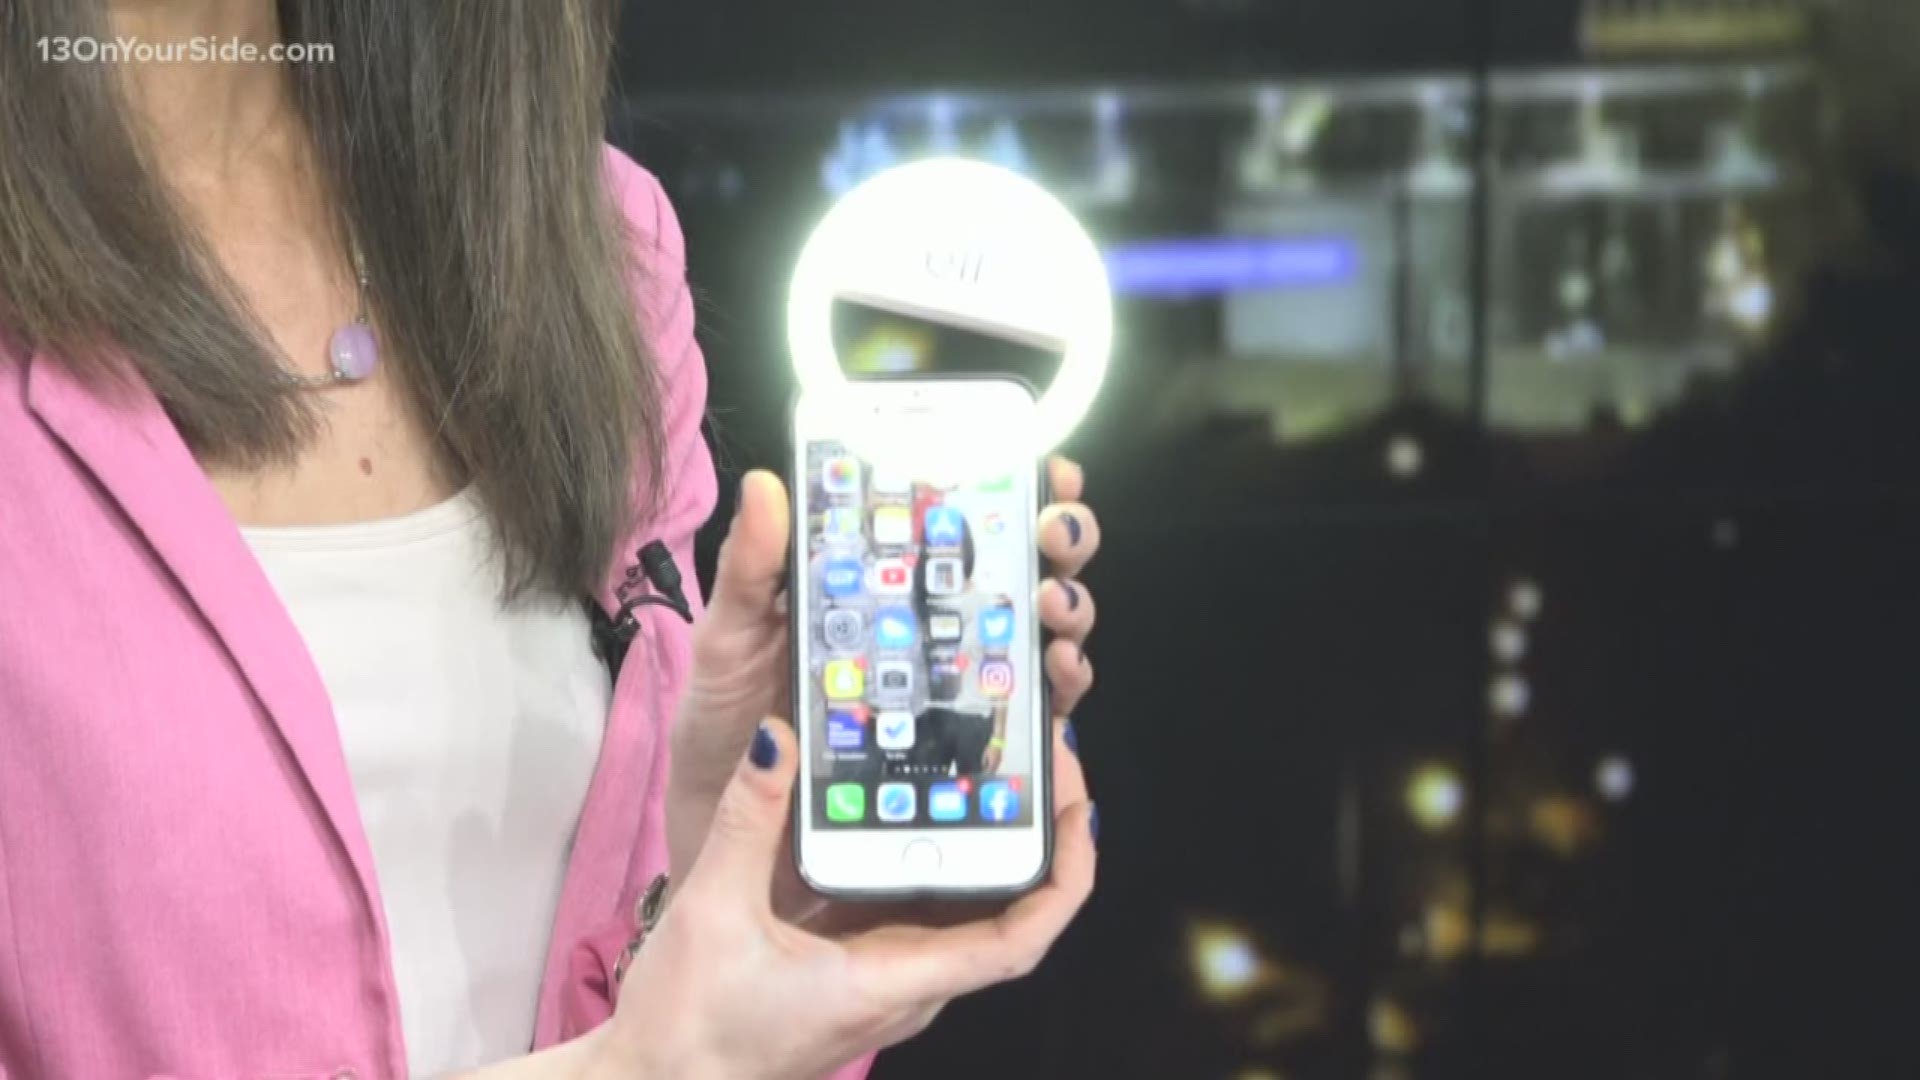 In the latest edition of "Try It Before You Buy It" Kristin Mazur puts a cell phone selfie ring light to the test to see if can up her selfie game.